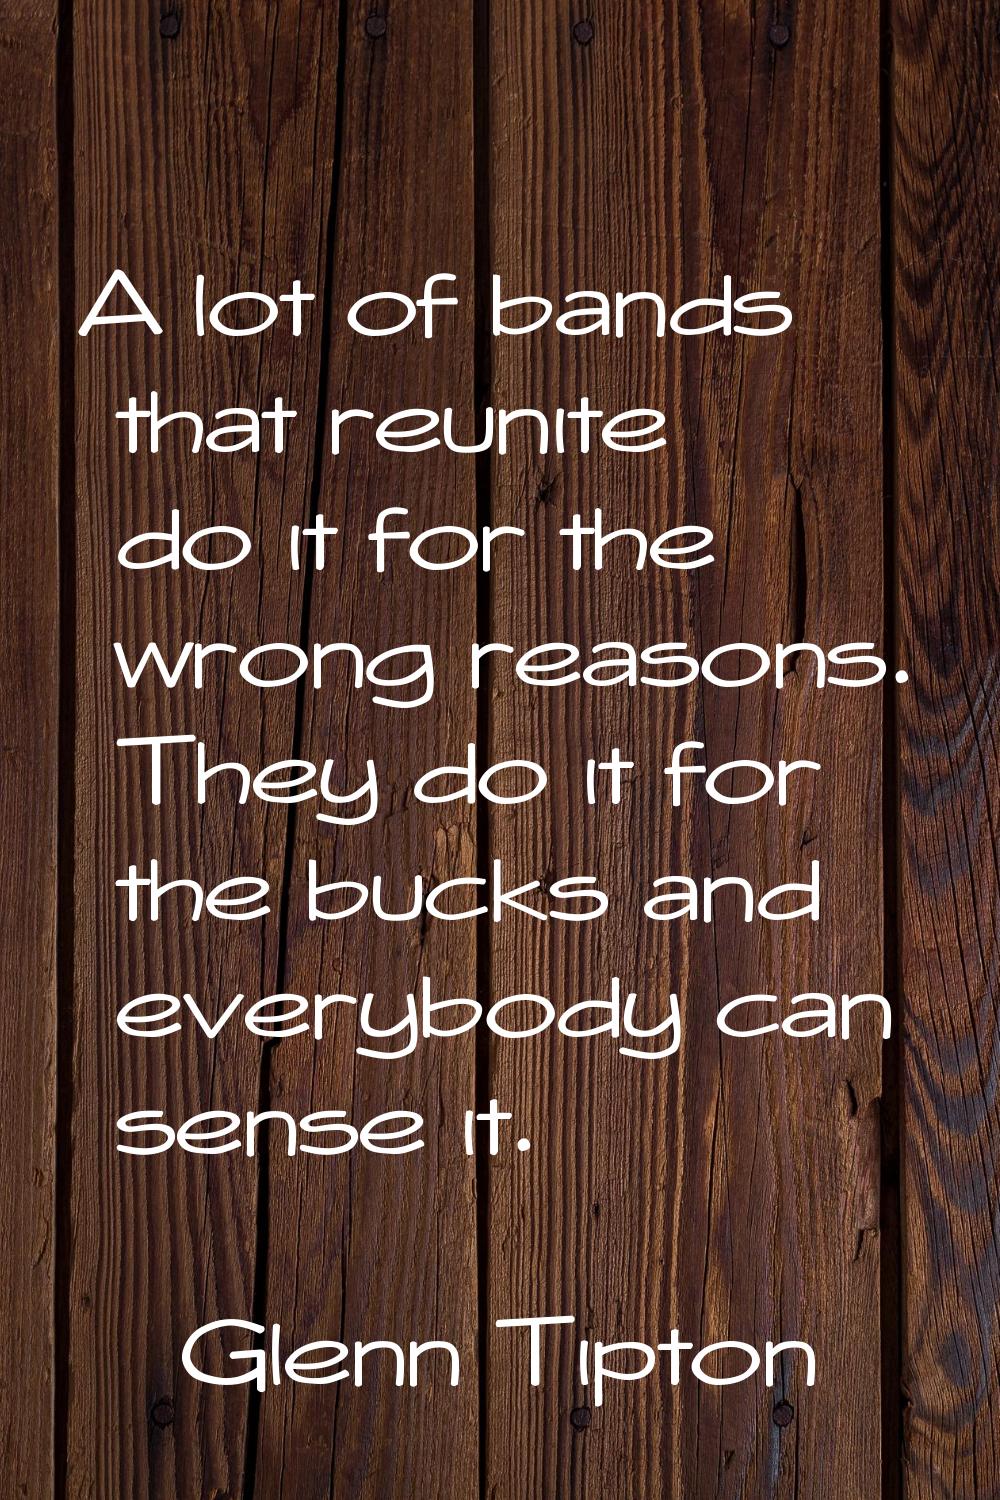 A lot of bands that reunite do it for the wrong reasons. They do it for the bucks and everybody can